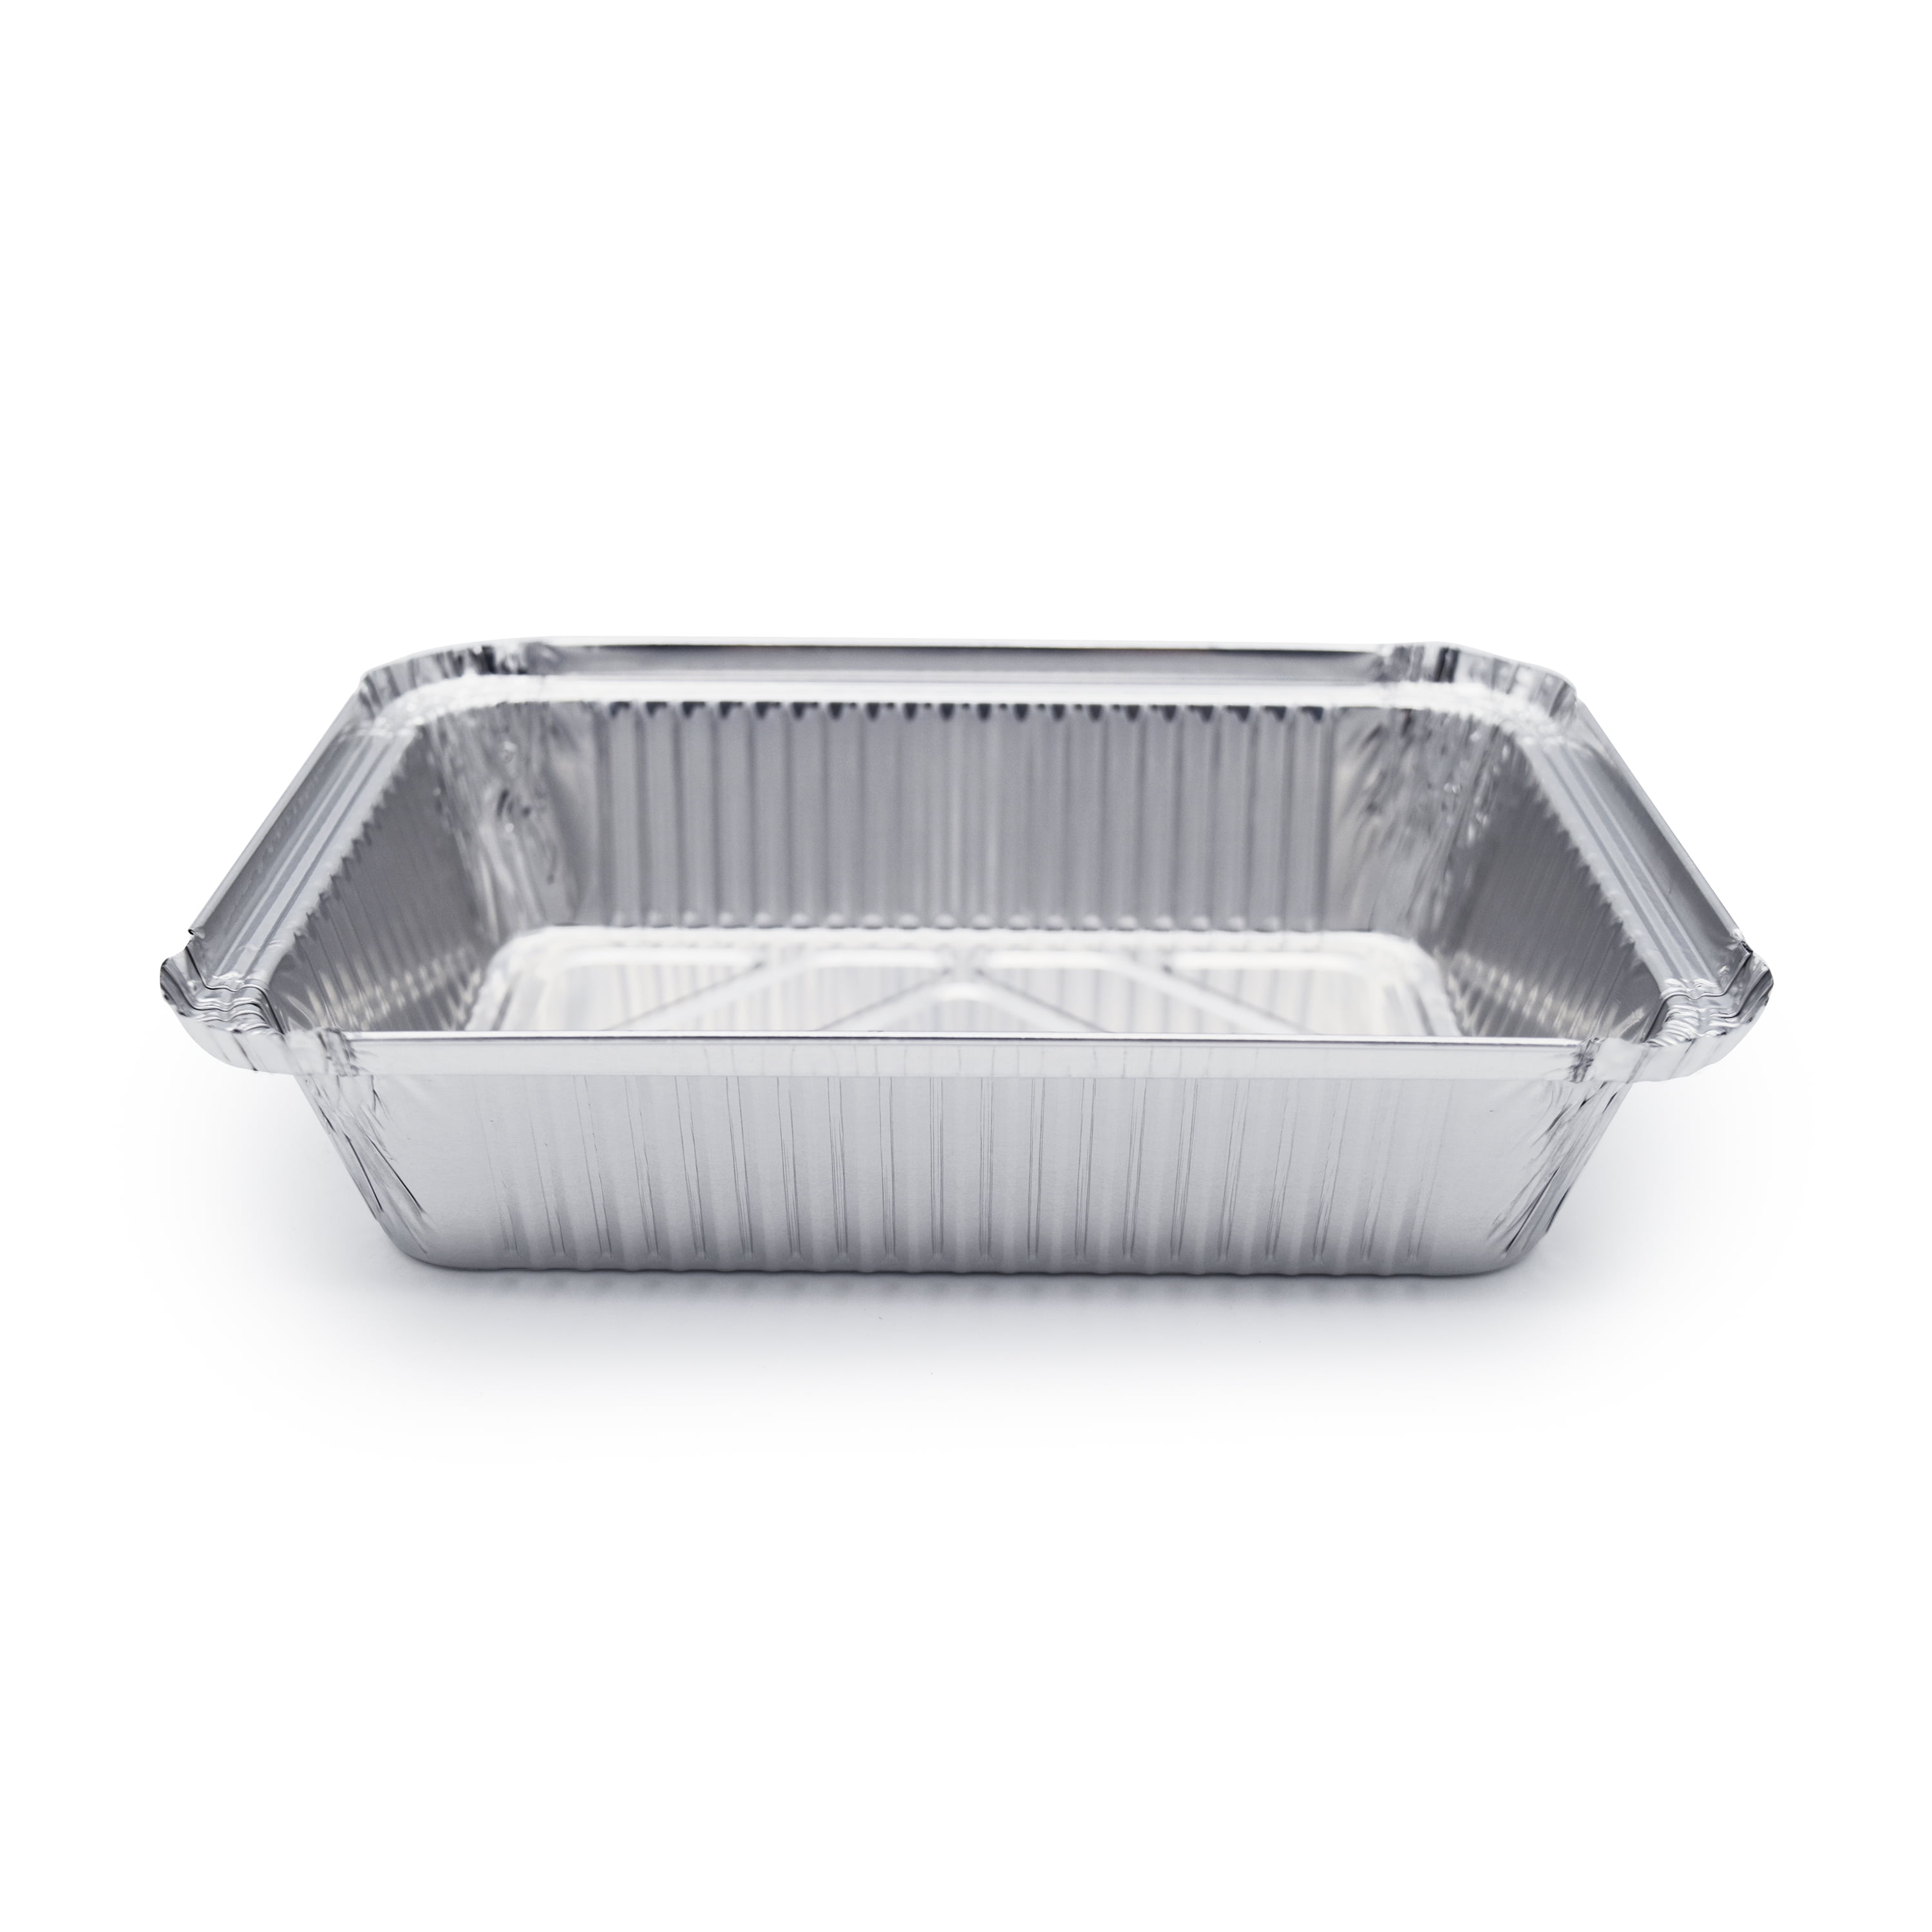 Premium Lids for Chafing Pans 9 x 13 Half Deep Pans l Top Choice Disposable Aluminum Foil Tin Pan Lid Perfect for Roasting Potluck Catering Party BBQ Baking Cakes Pies Fig & Leaf 40 Pack 